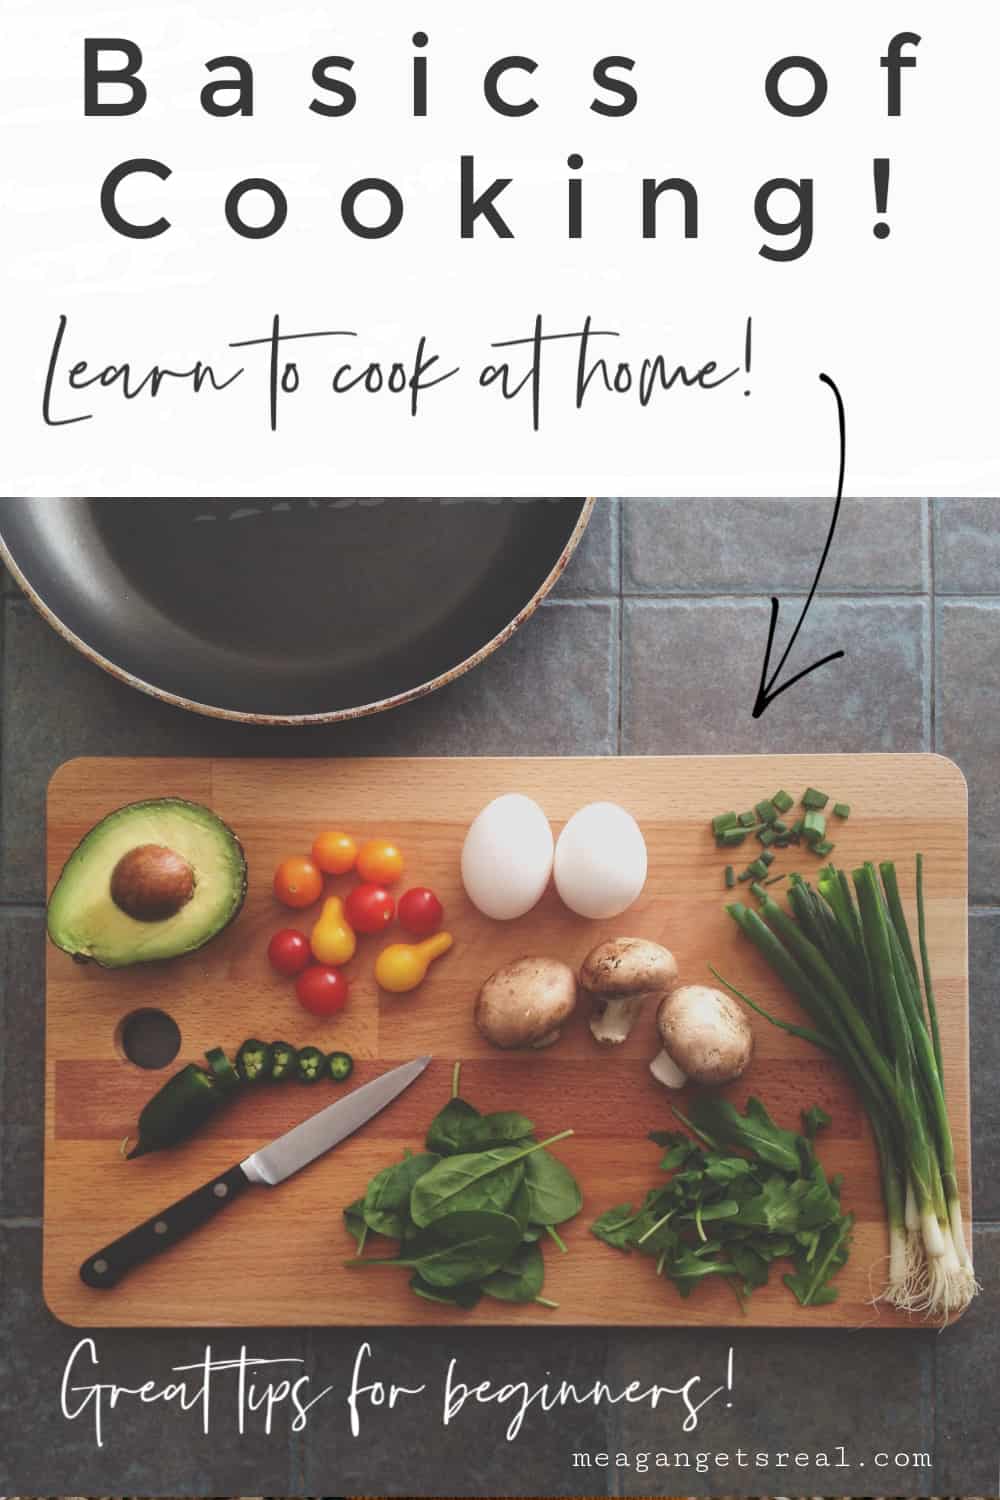 With this basics of cooking post you can learn simple tips to learn to cook from home. Learn to cook a variety of foods your family likes. 